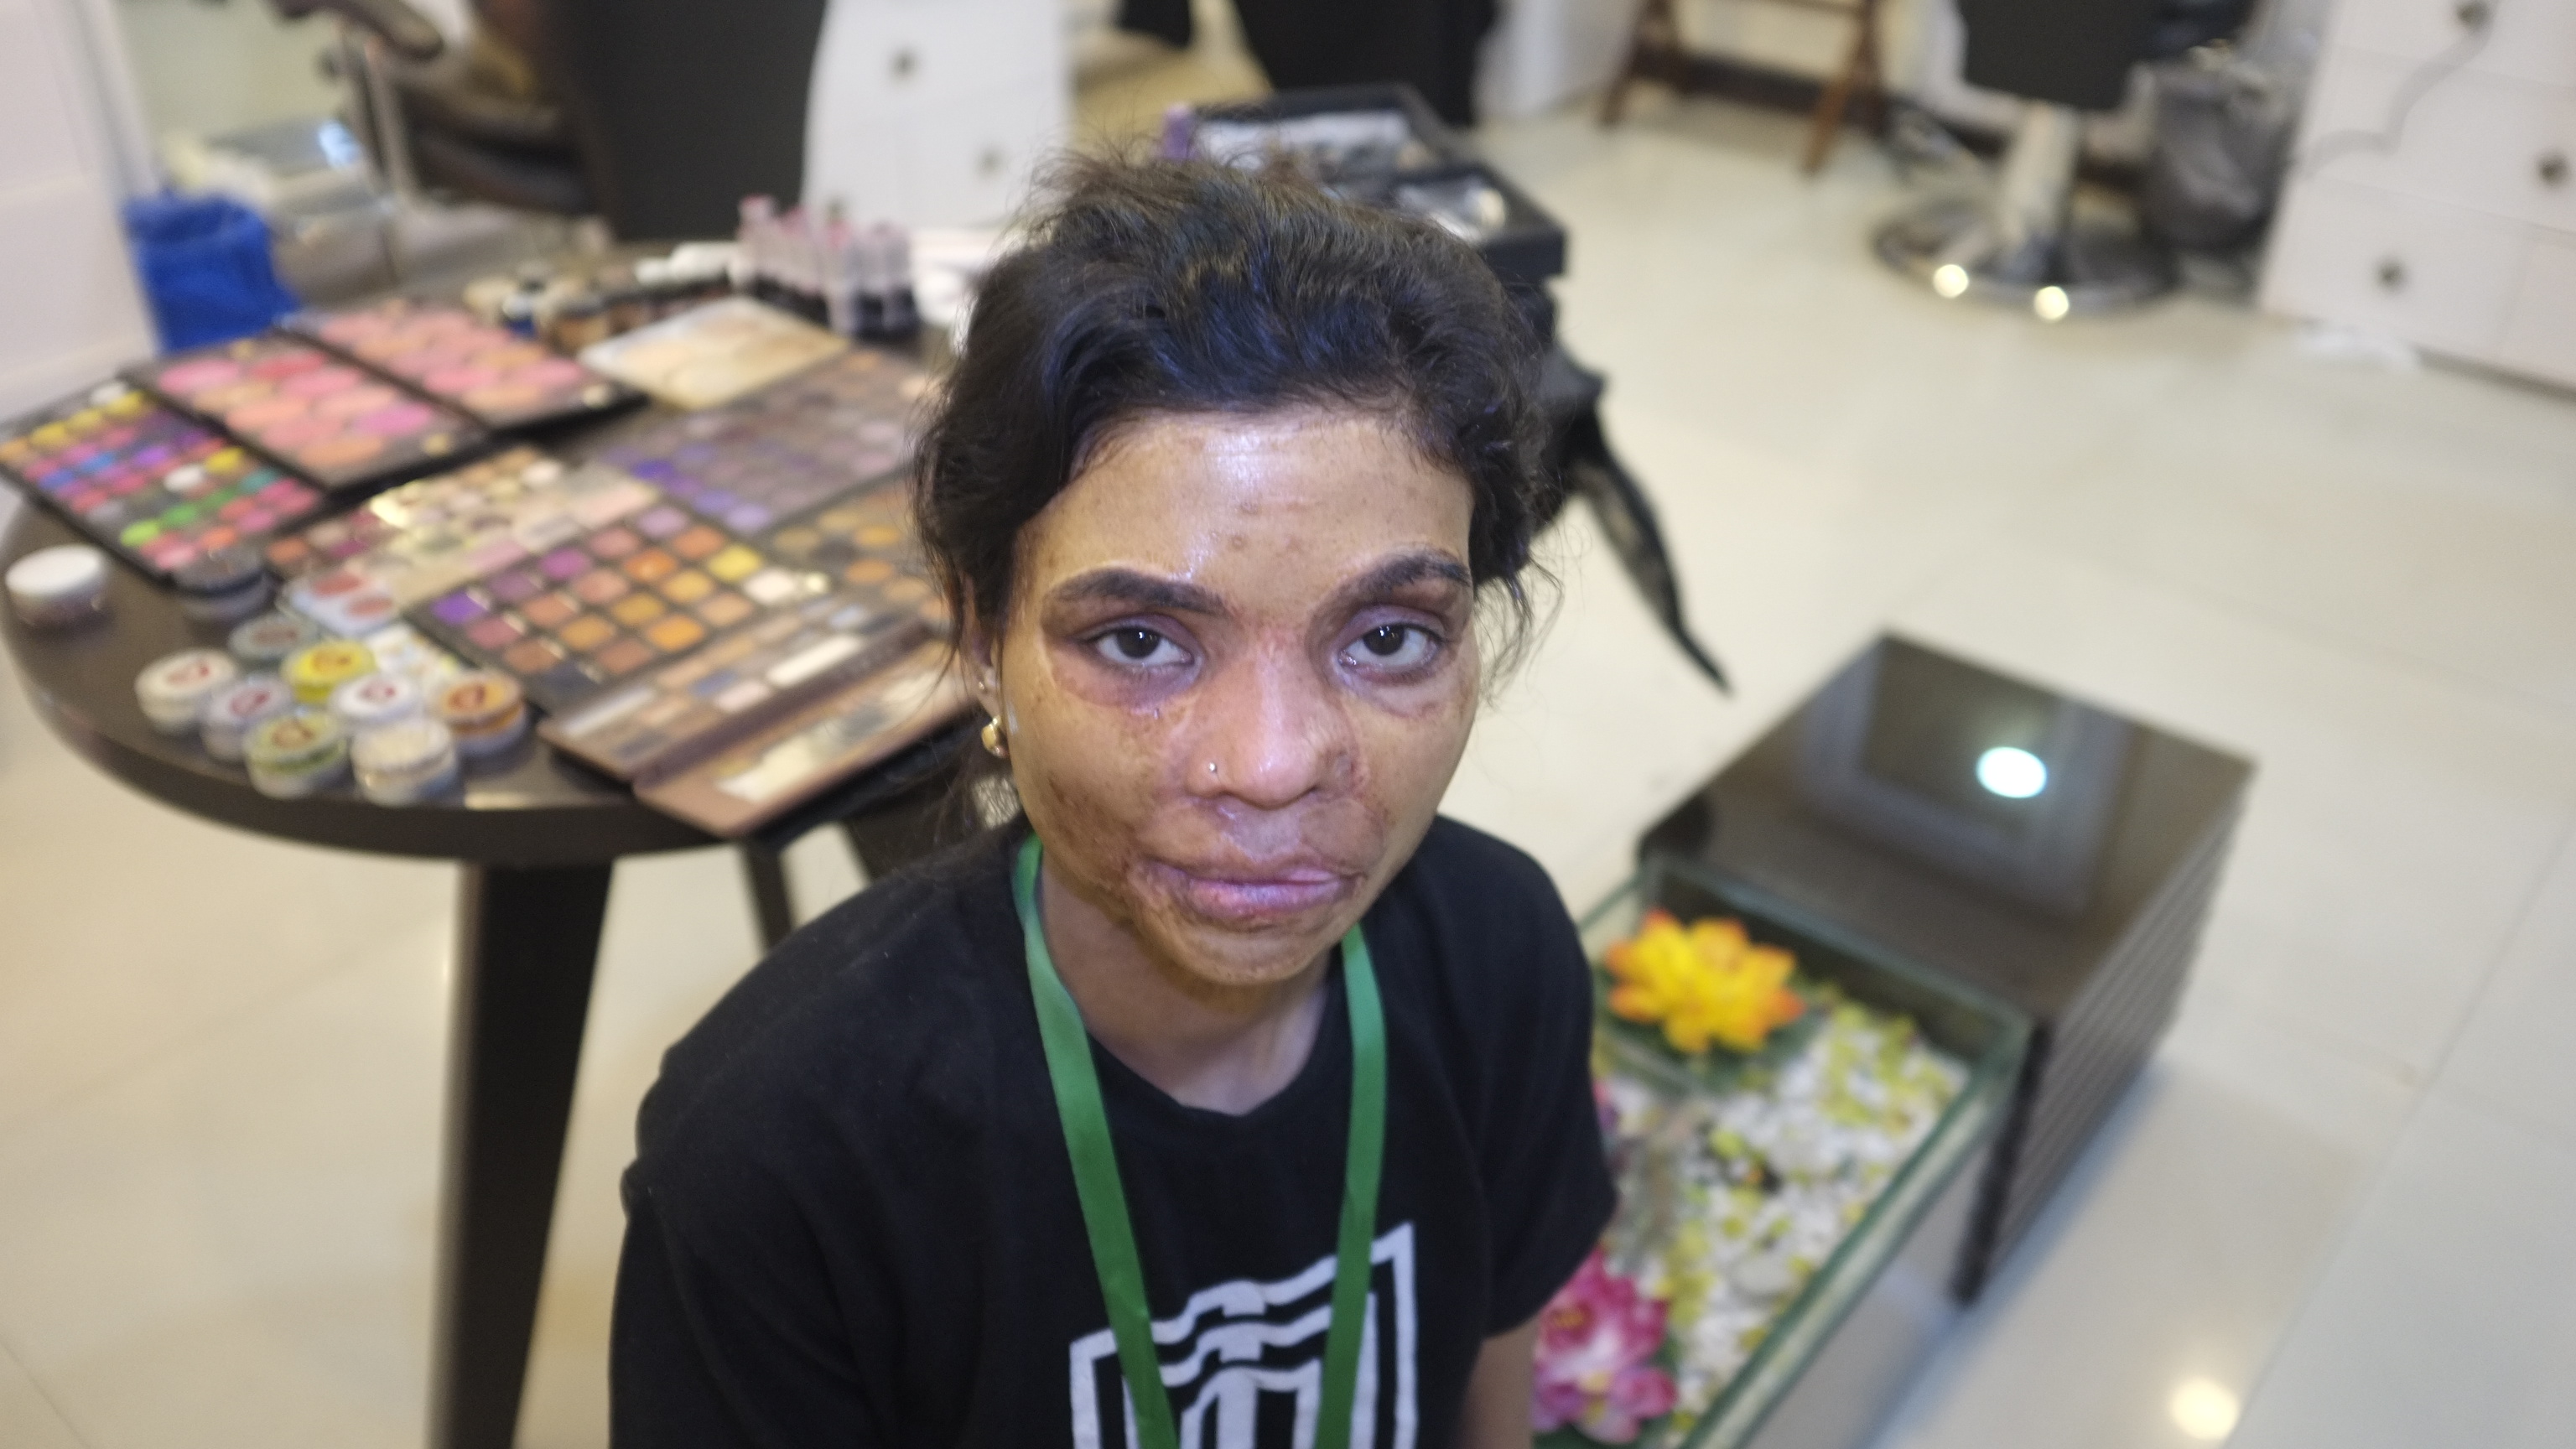 Artificial skin trial offers hope to Pakistan's acid attack victims